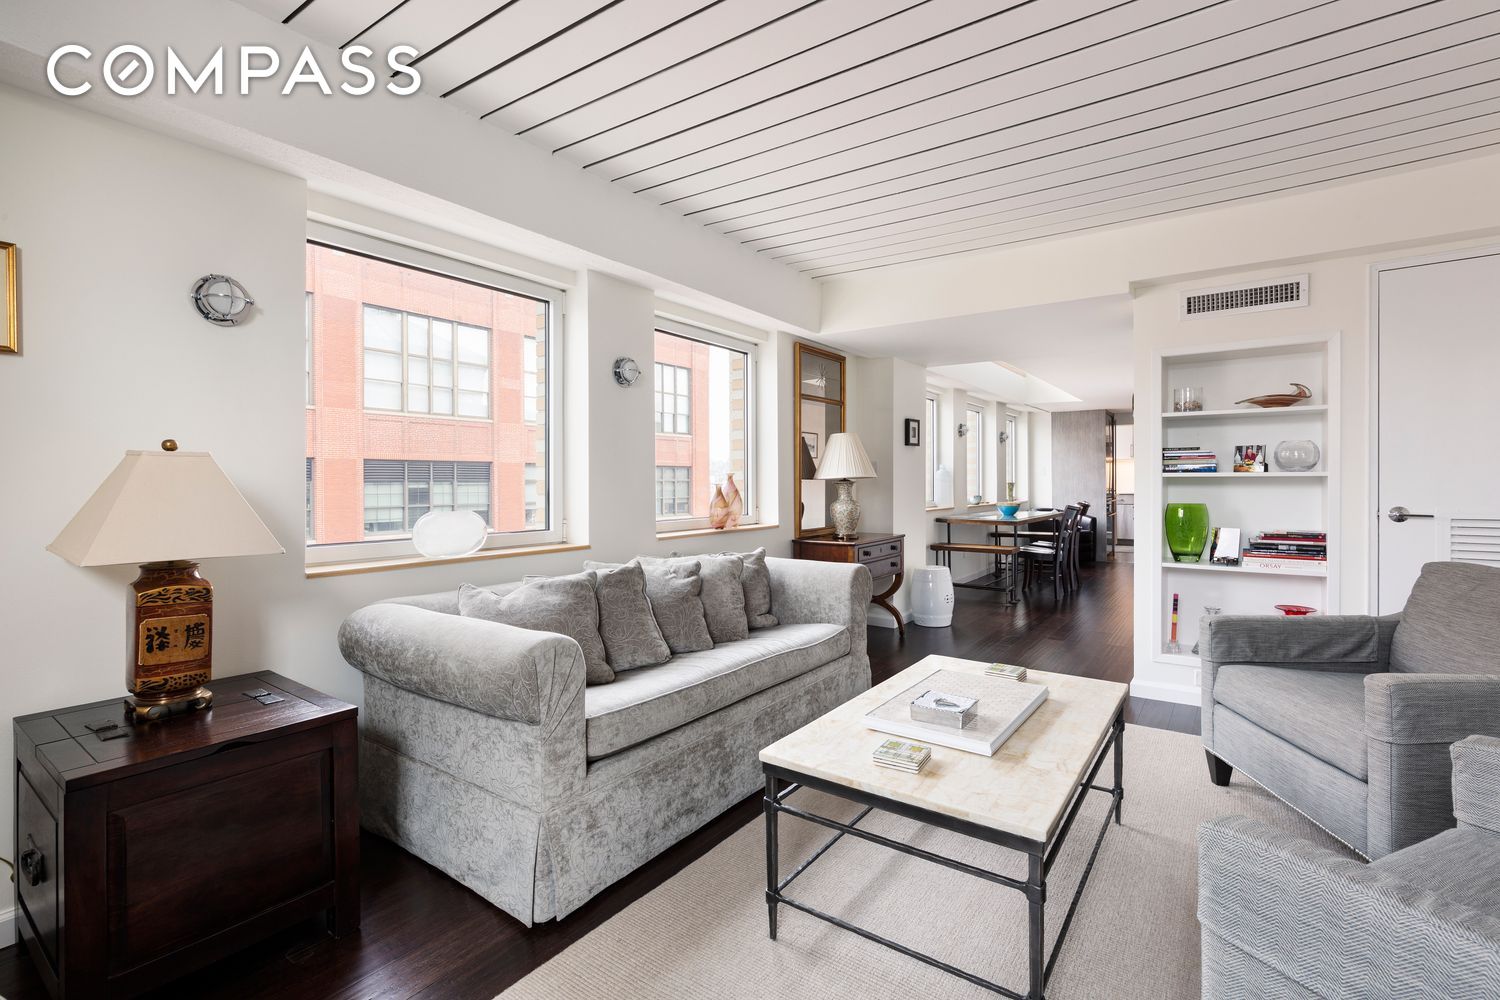 421 Hudson Street Ph825, West Village, Downtown, NYC - 2 Bedrooms  
1.5 Bathrooms  
4 Rooms - 